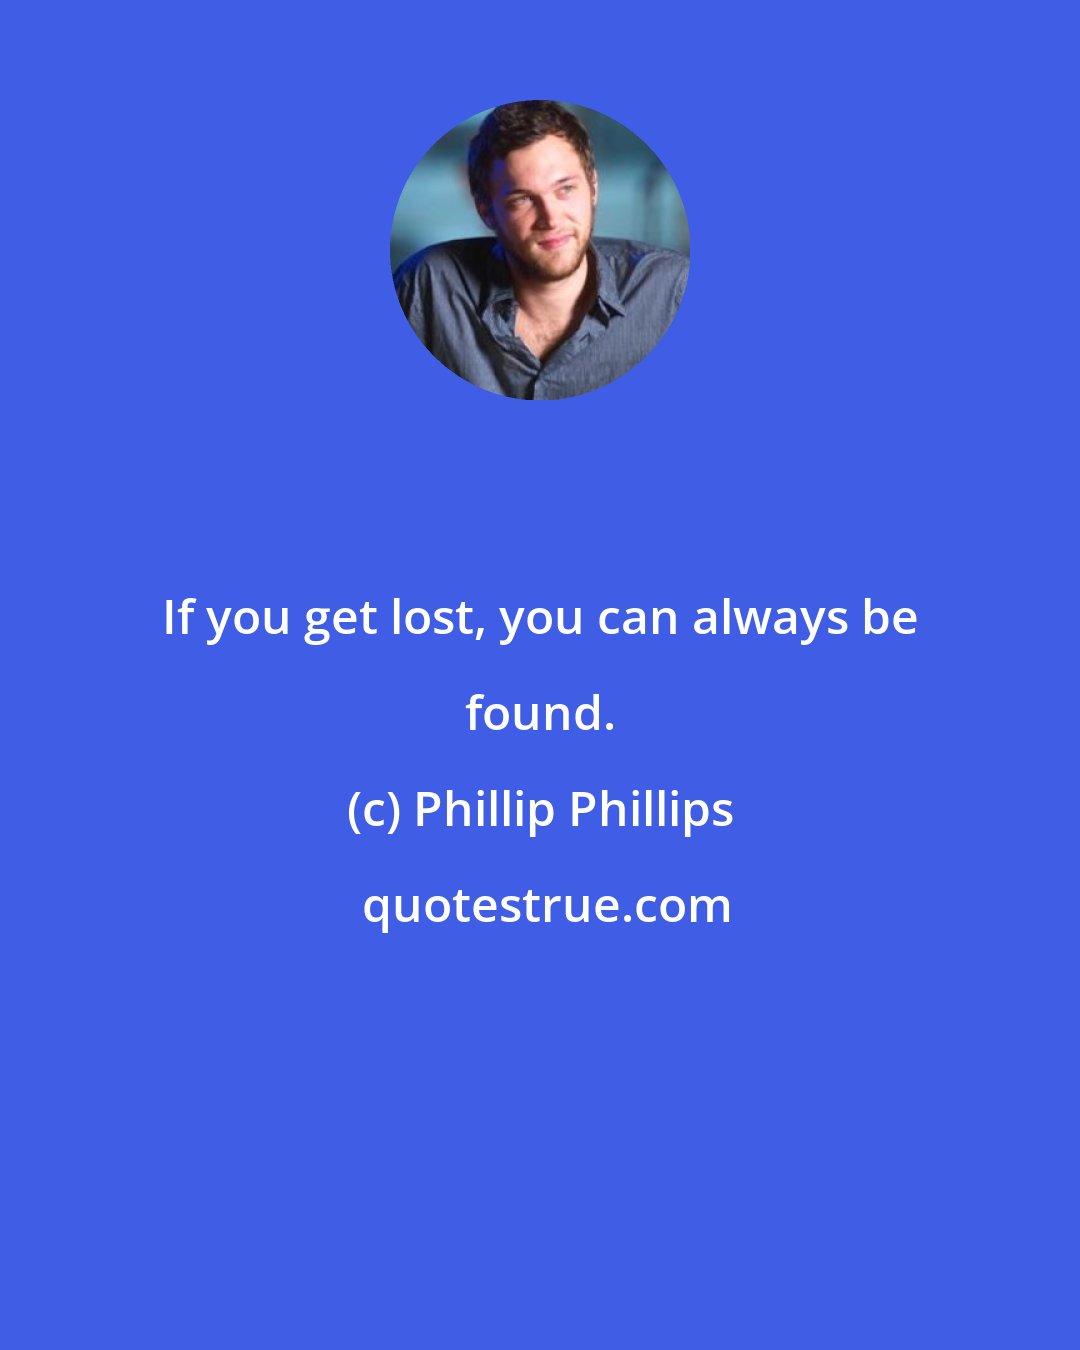 Phillip Phillips: If you get lost, you can always be found.